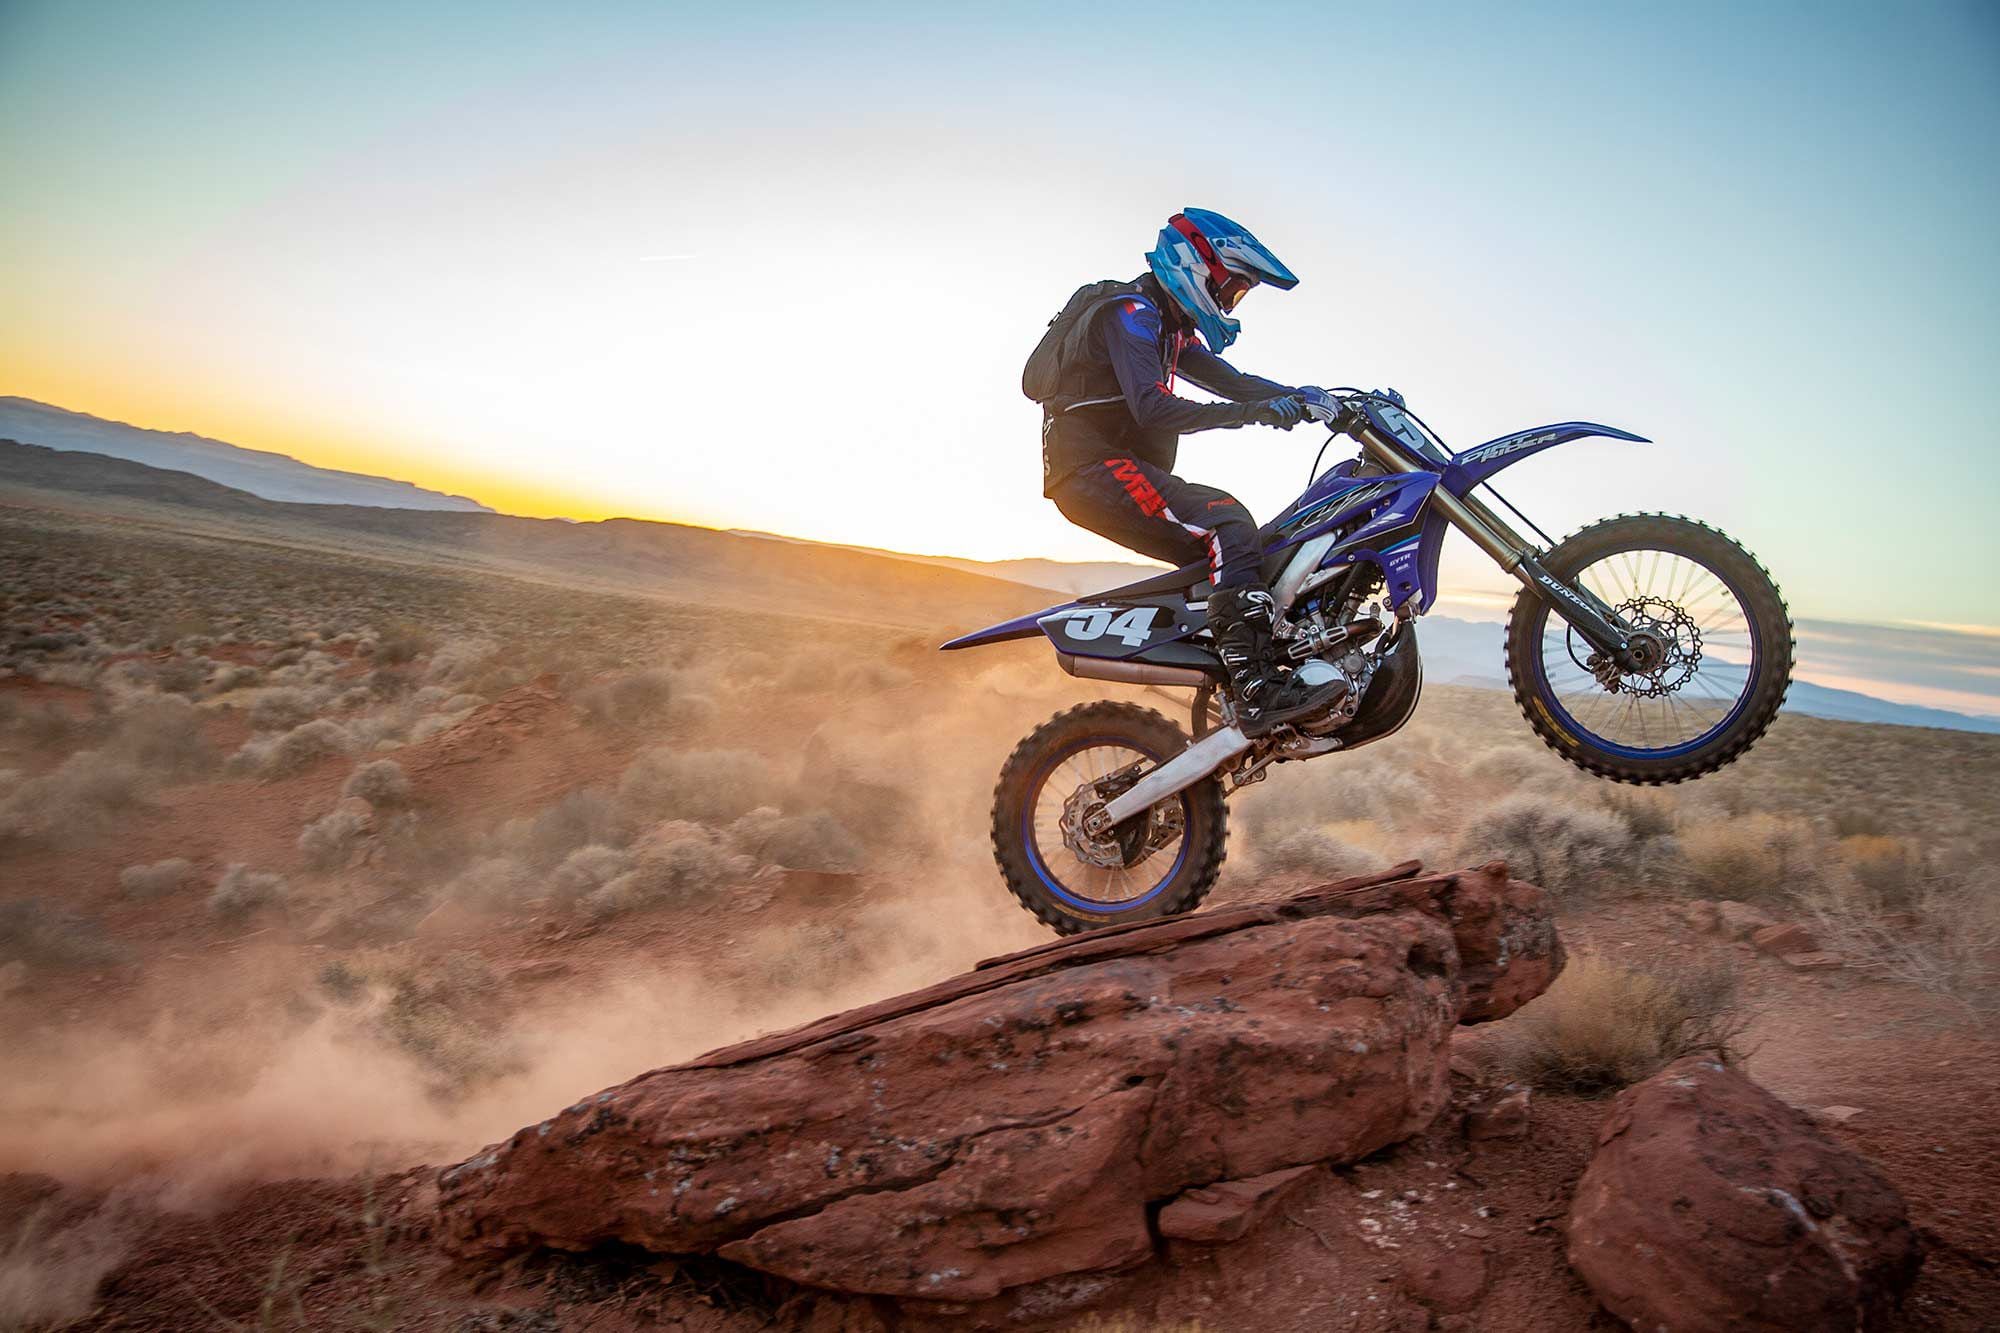 With its smaller-displacement engine and planted suspension, the YZ250FX excels at finding traction.